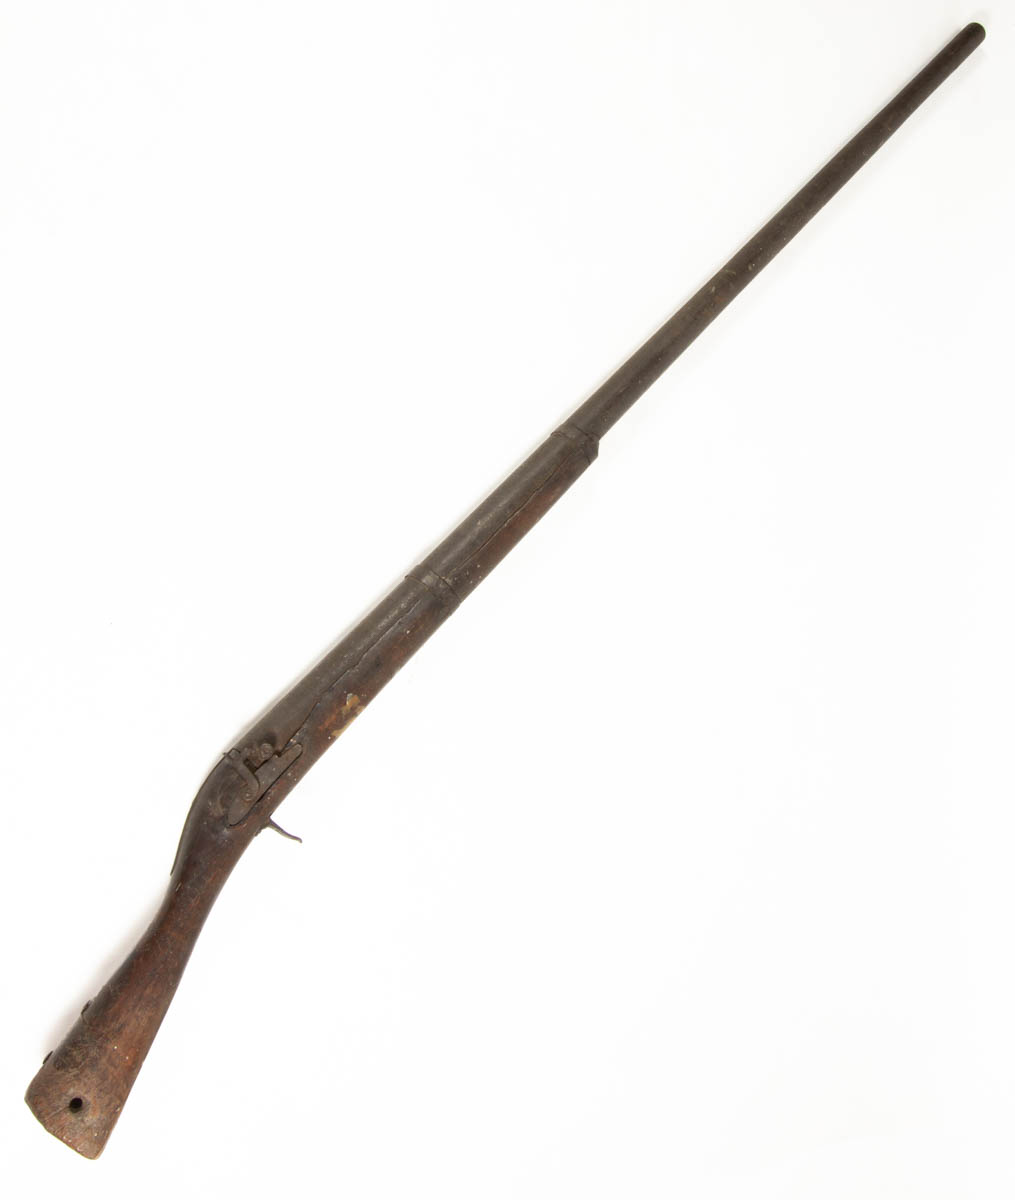 MASSIVE EARLY PERCUSSION PUNT OR MARKET GUN